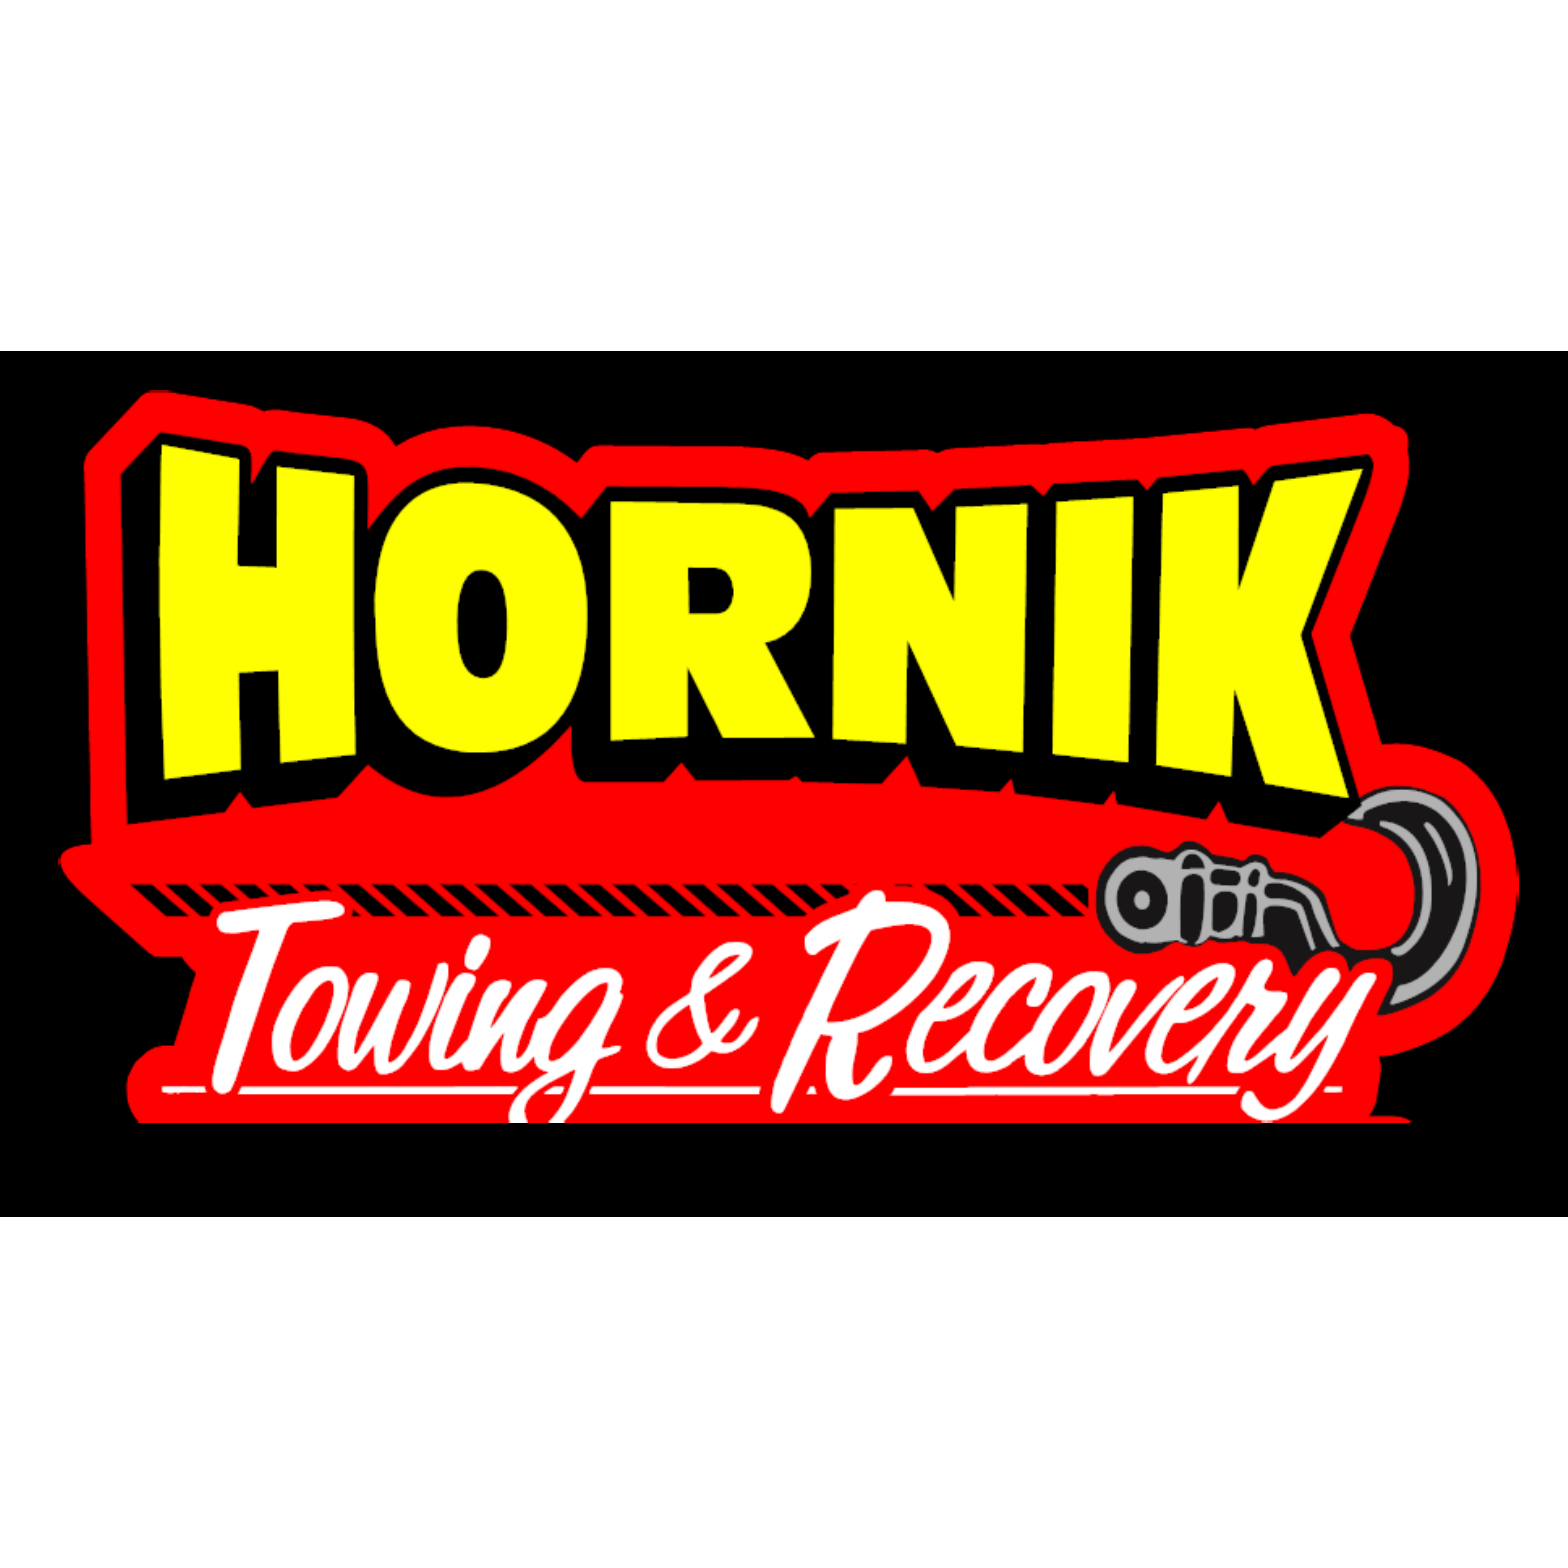 Hornik Towing & Recovery - Janesville, WI 53545 - (608)757-8261 | ShowMeLocal.com